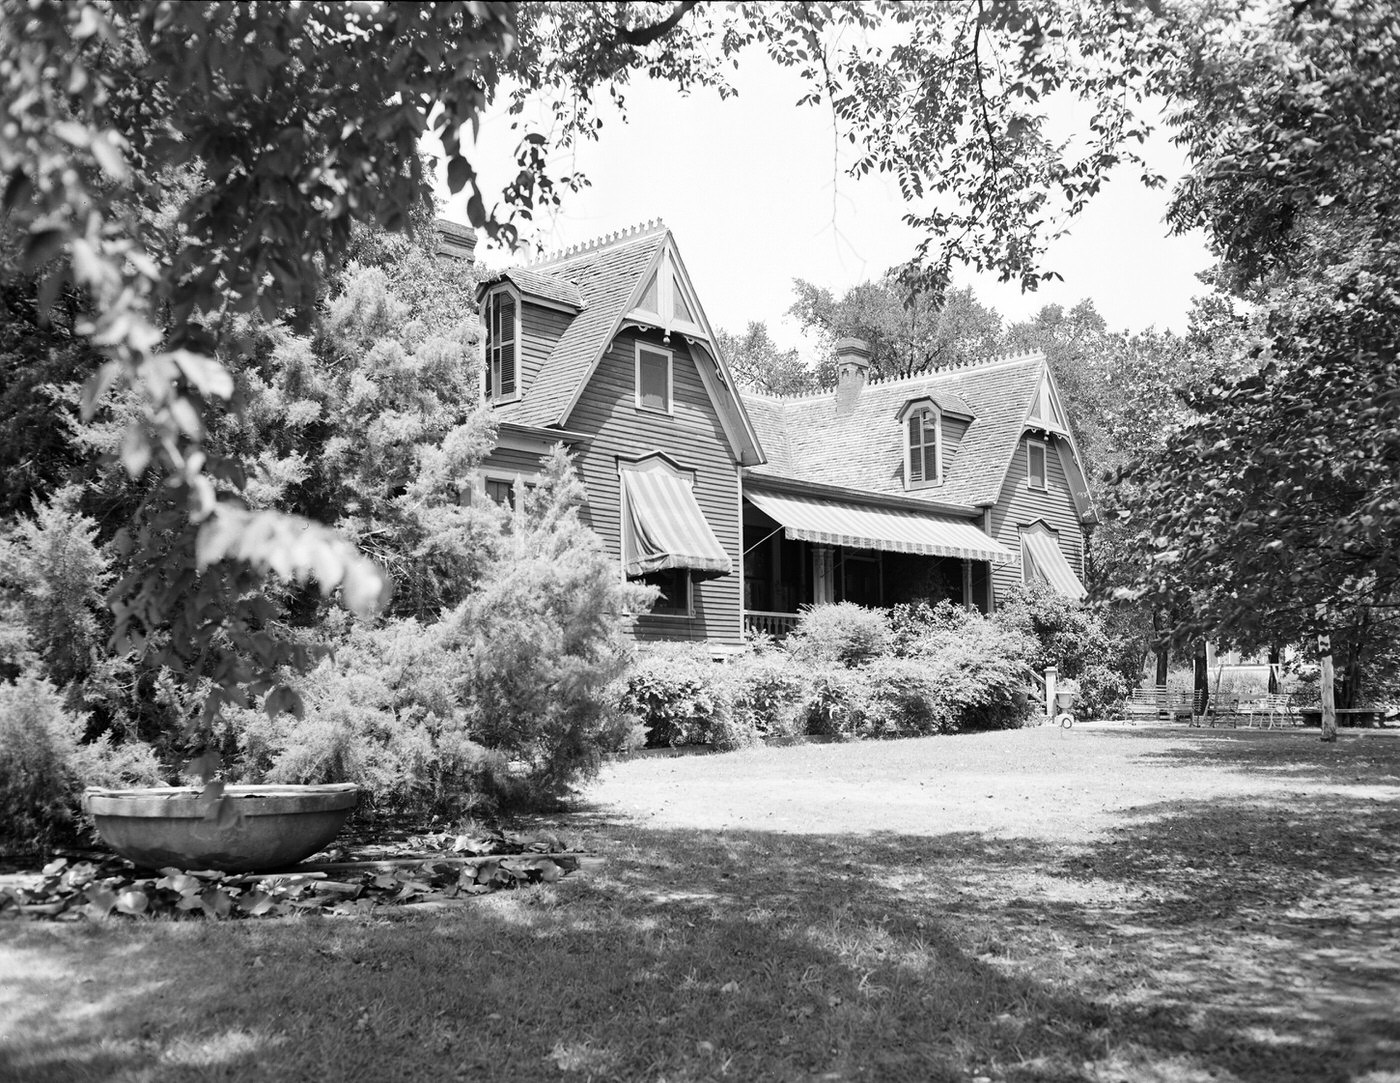 M.M. Barnes home, 1502 Summit Avenue, Fort Worth; bequeathed to city for a park, originally built by George B. Loving ca. 1880; bought by E.G. Harrold, father of Mrs. Barnes, 1947